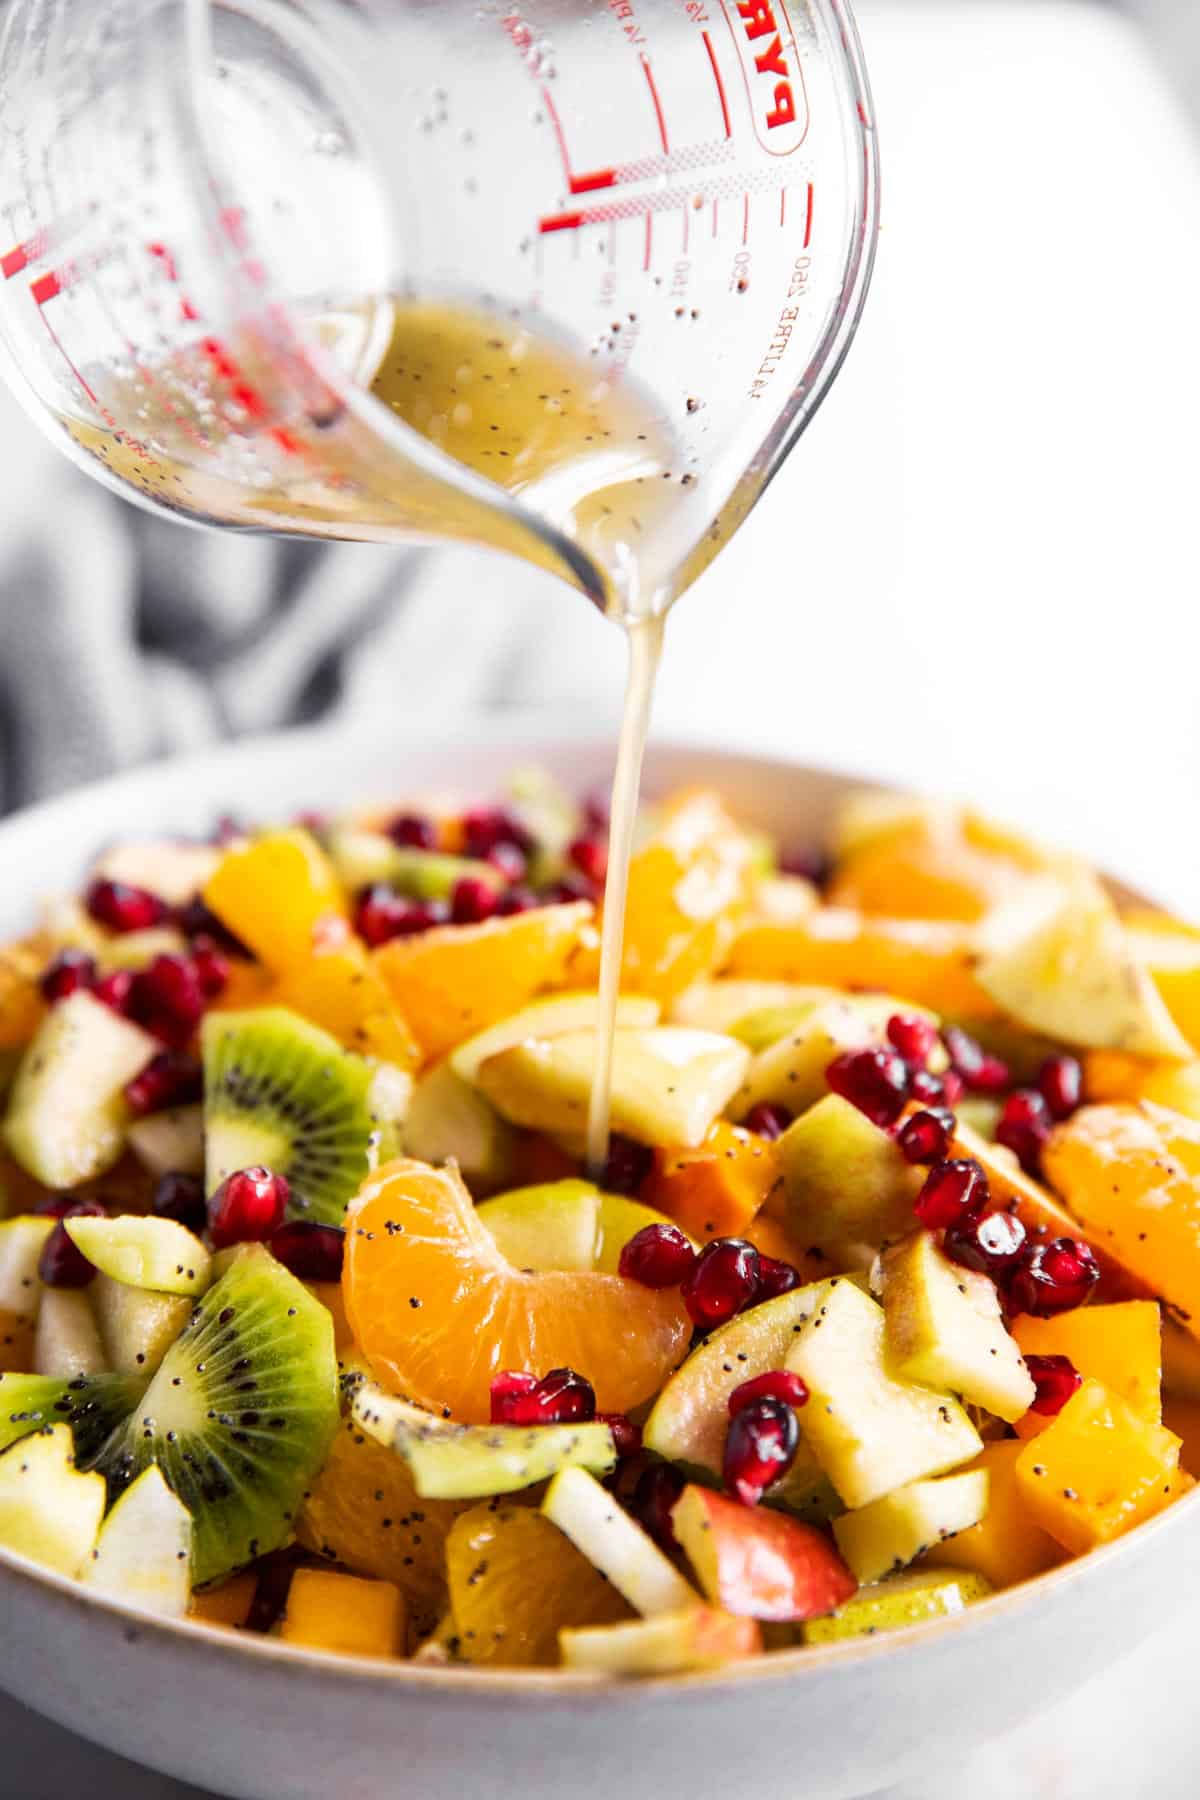 poppy seed dressing pouring from a glass measuring jug over fruit salad